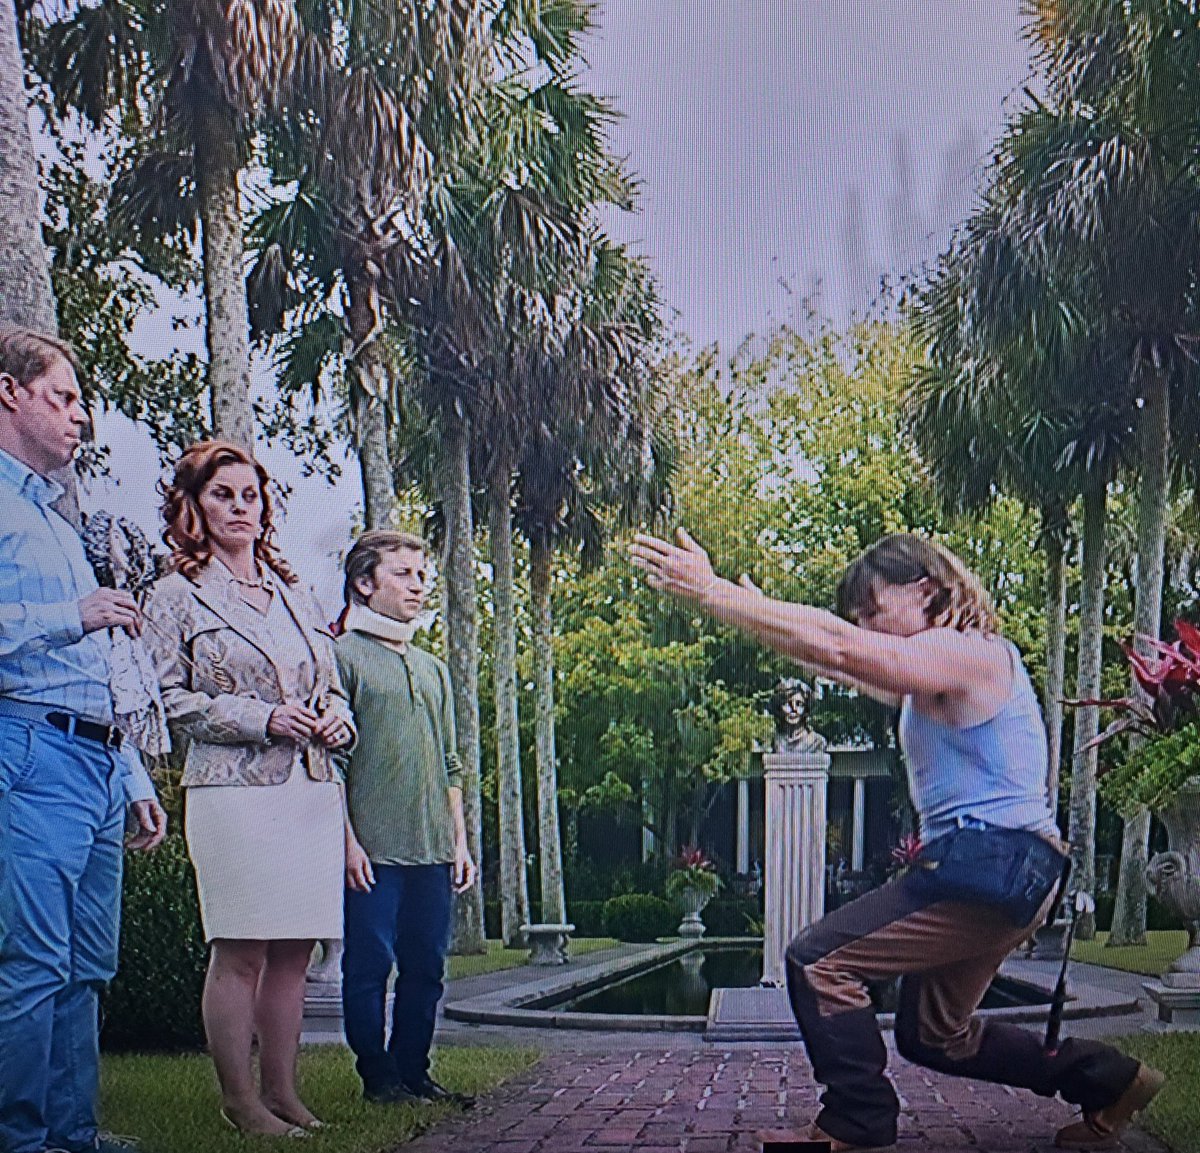 I 💖 Tony Cavalero on this show!! Always taking the big swings.
But what exactly was...this..? 😆
Poor lovelorn Keefe.
#RighteousGemstones #TonyCavalero